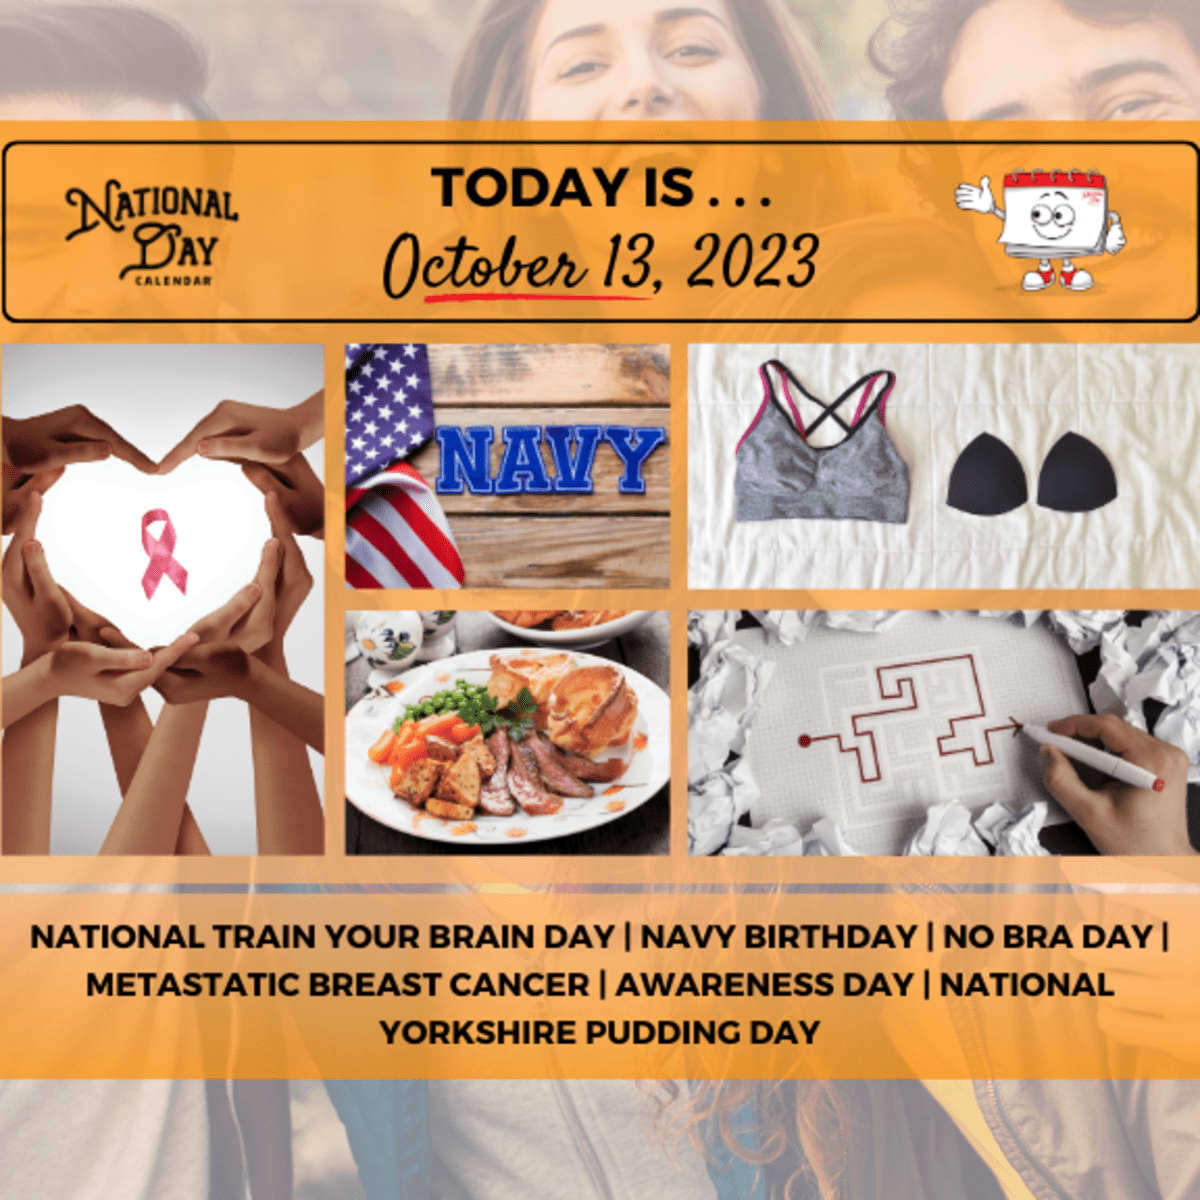 OCTOBER 13, 2023, NATIONAL TRAIN YOUR BRAIN DAY